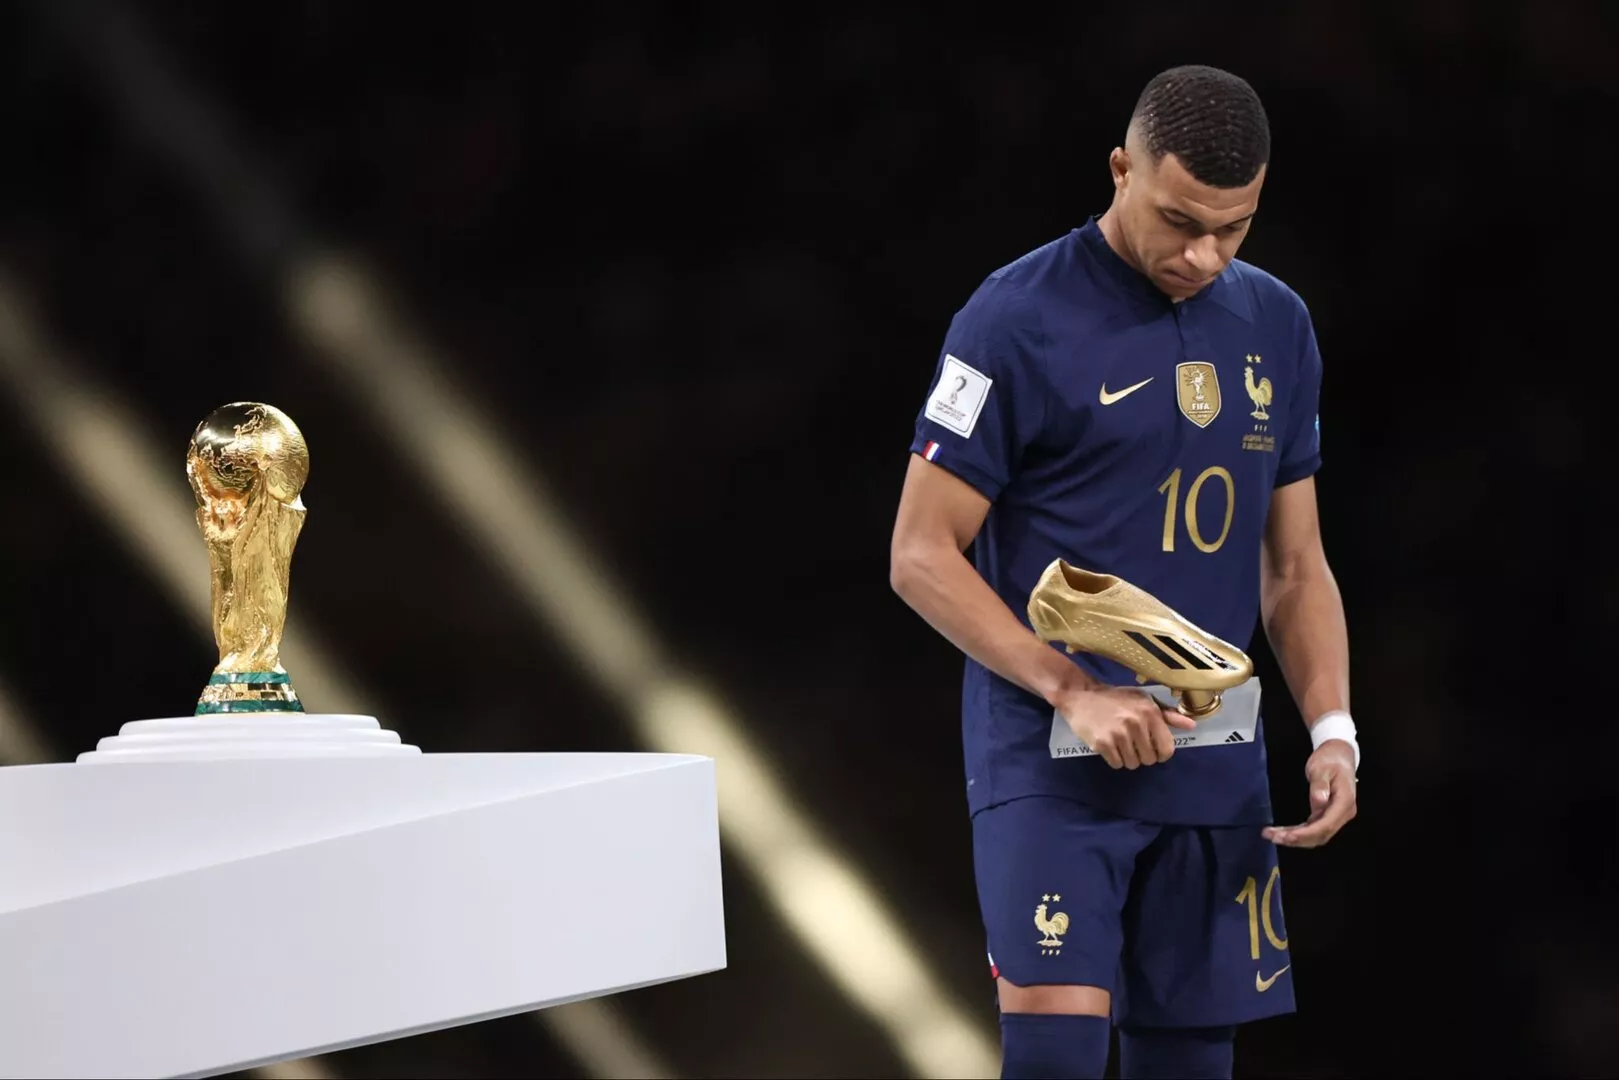 Kylian Mbappe predicts Manchester City will win Champions League final